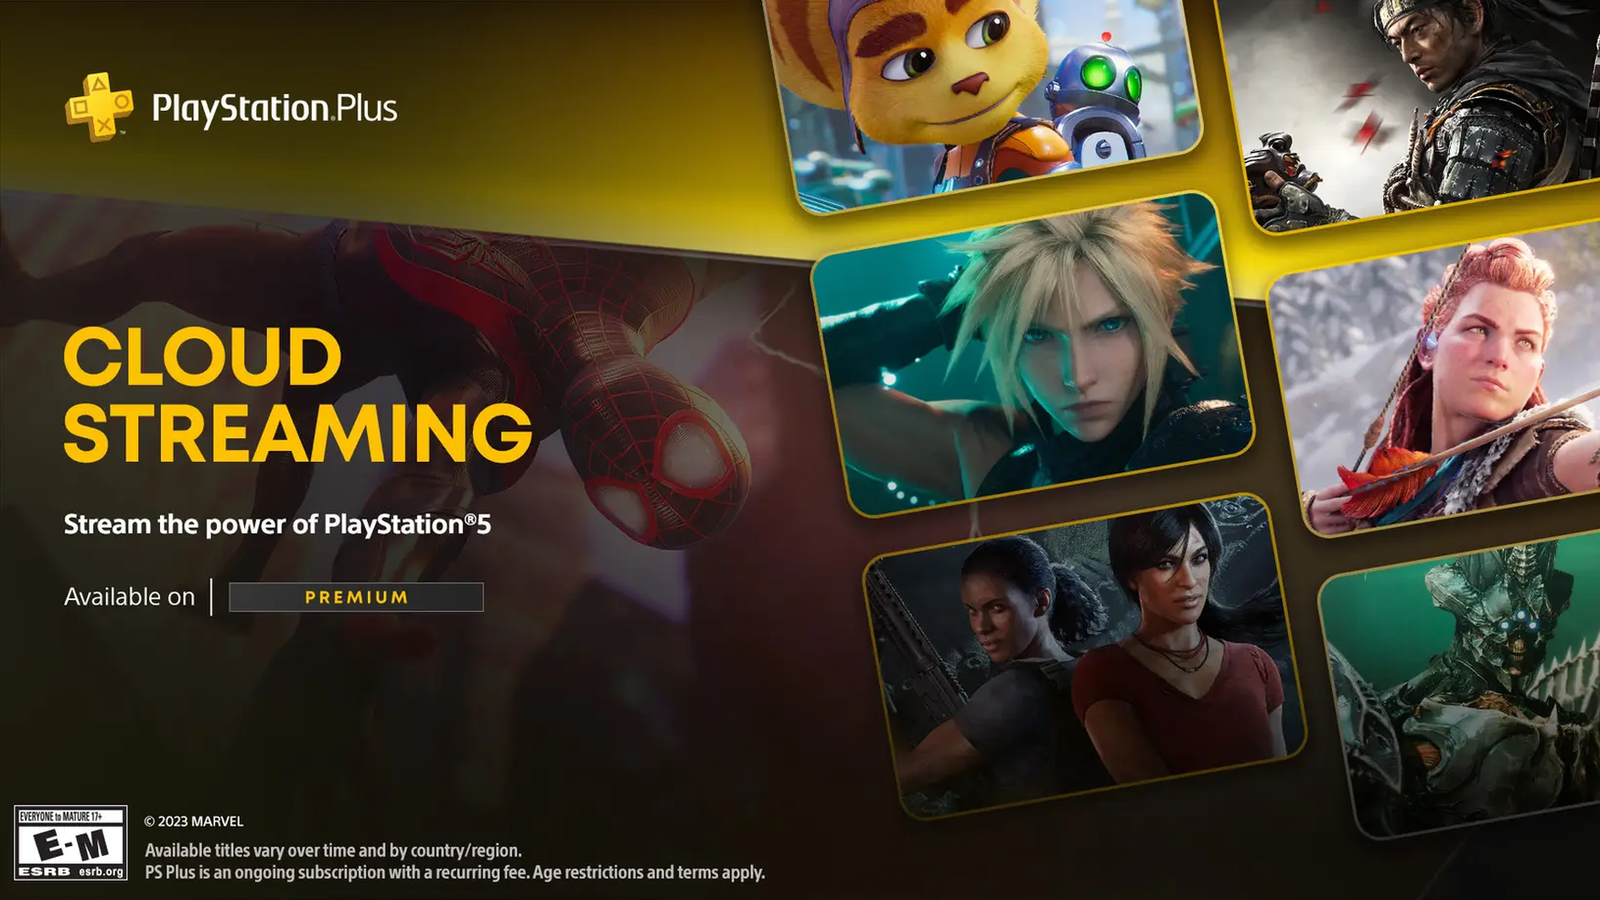 PlayStation Plus Premium requires time-limited game trials for developers 